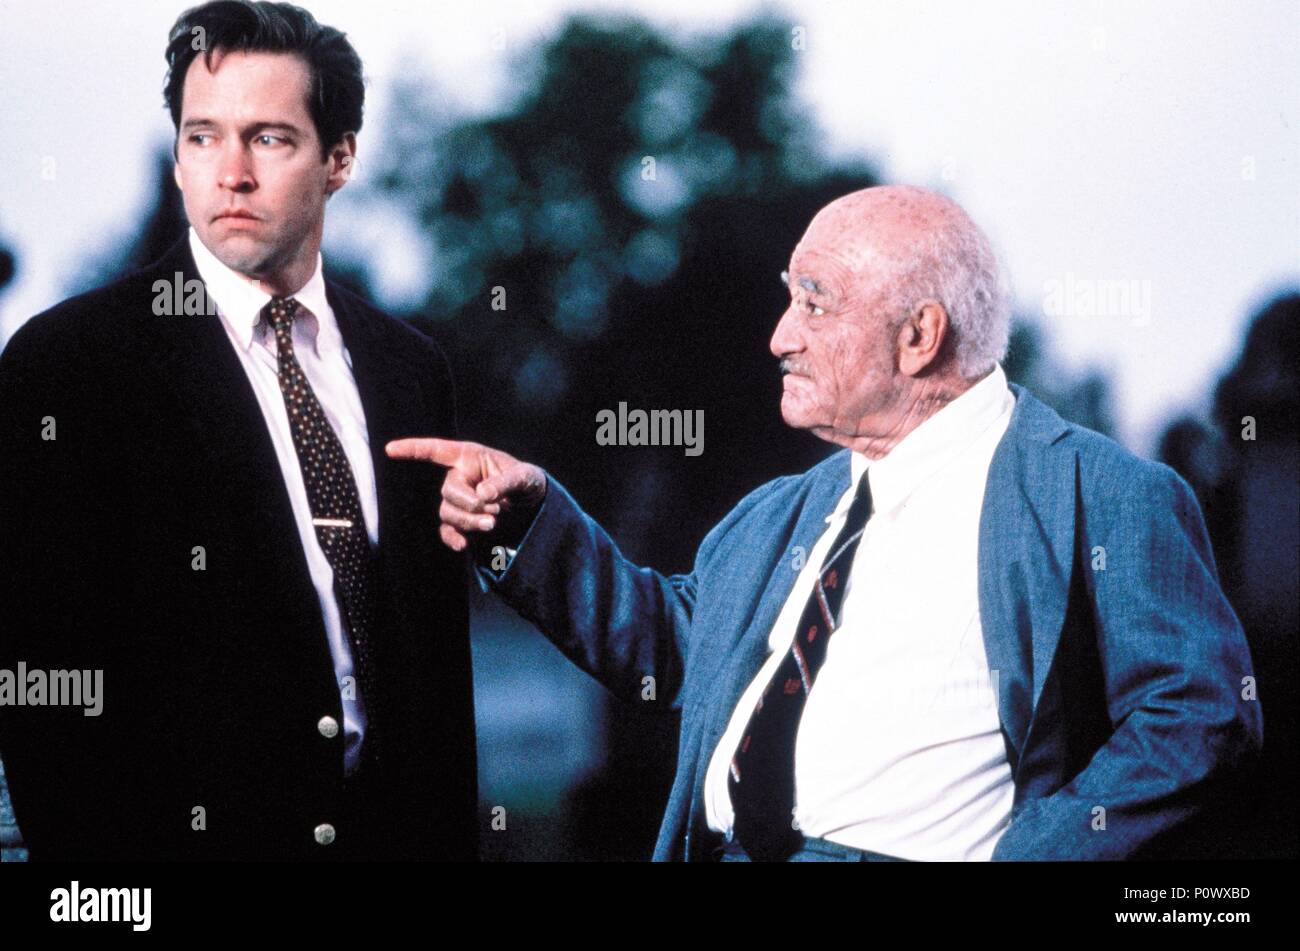 Original Film Title: ROOMMATES.  English Title: ROOMMATES.  Film Director: PETER YATES.  Year: 1995.  Stars: PETER FALK; D. B. SWEENEY. Credit: HOLLYWOOD PICTURES / Album Stock Photo